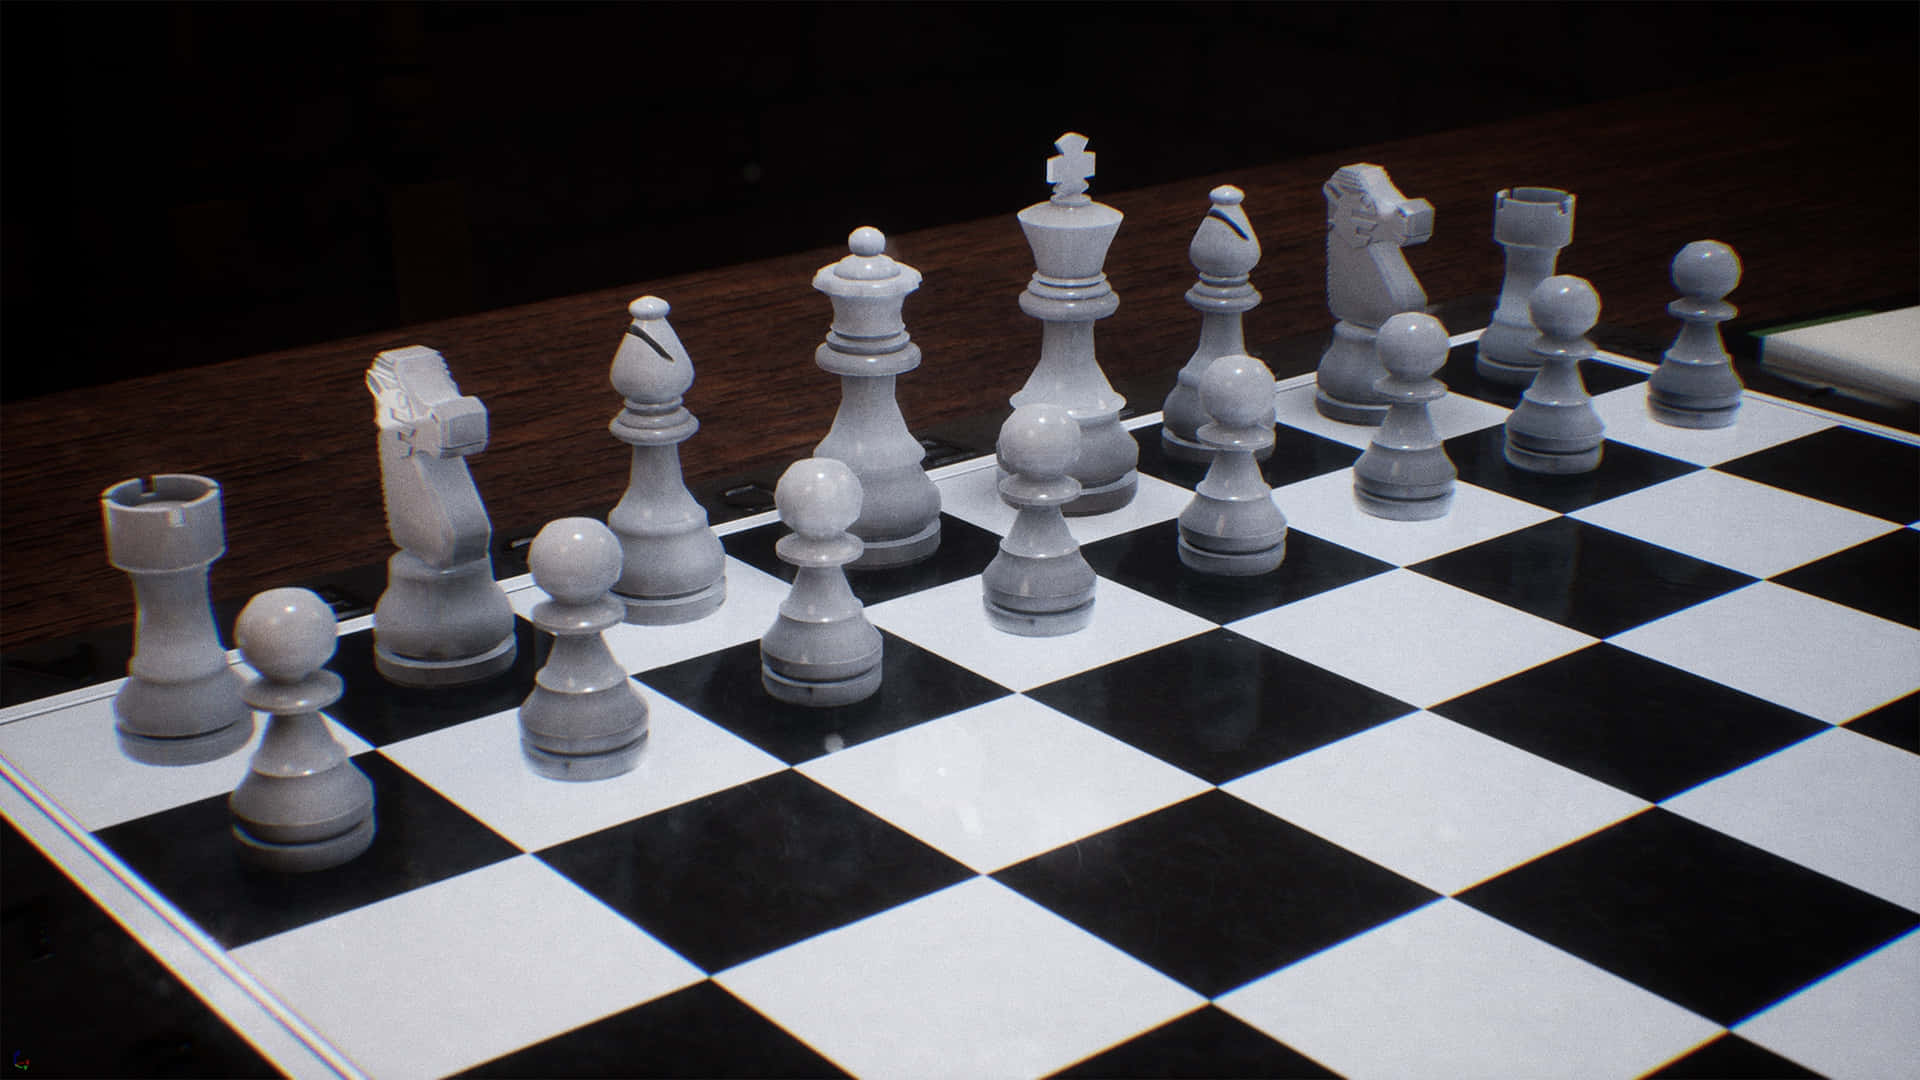 Strategize Your Move And Become The Ultimate Chess Grandmaster. Background